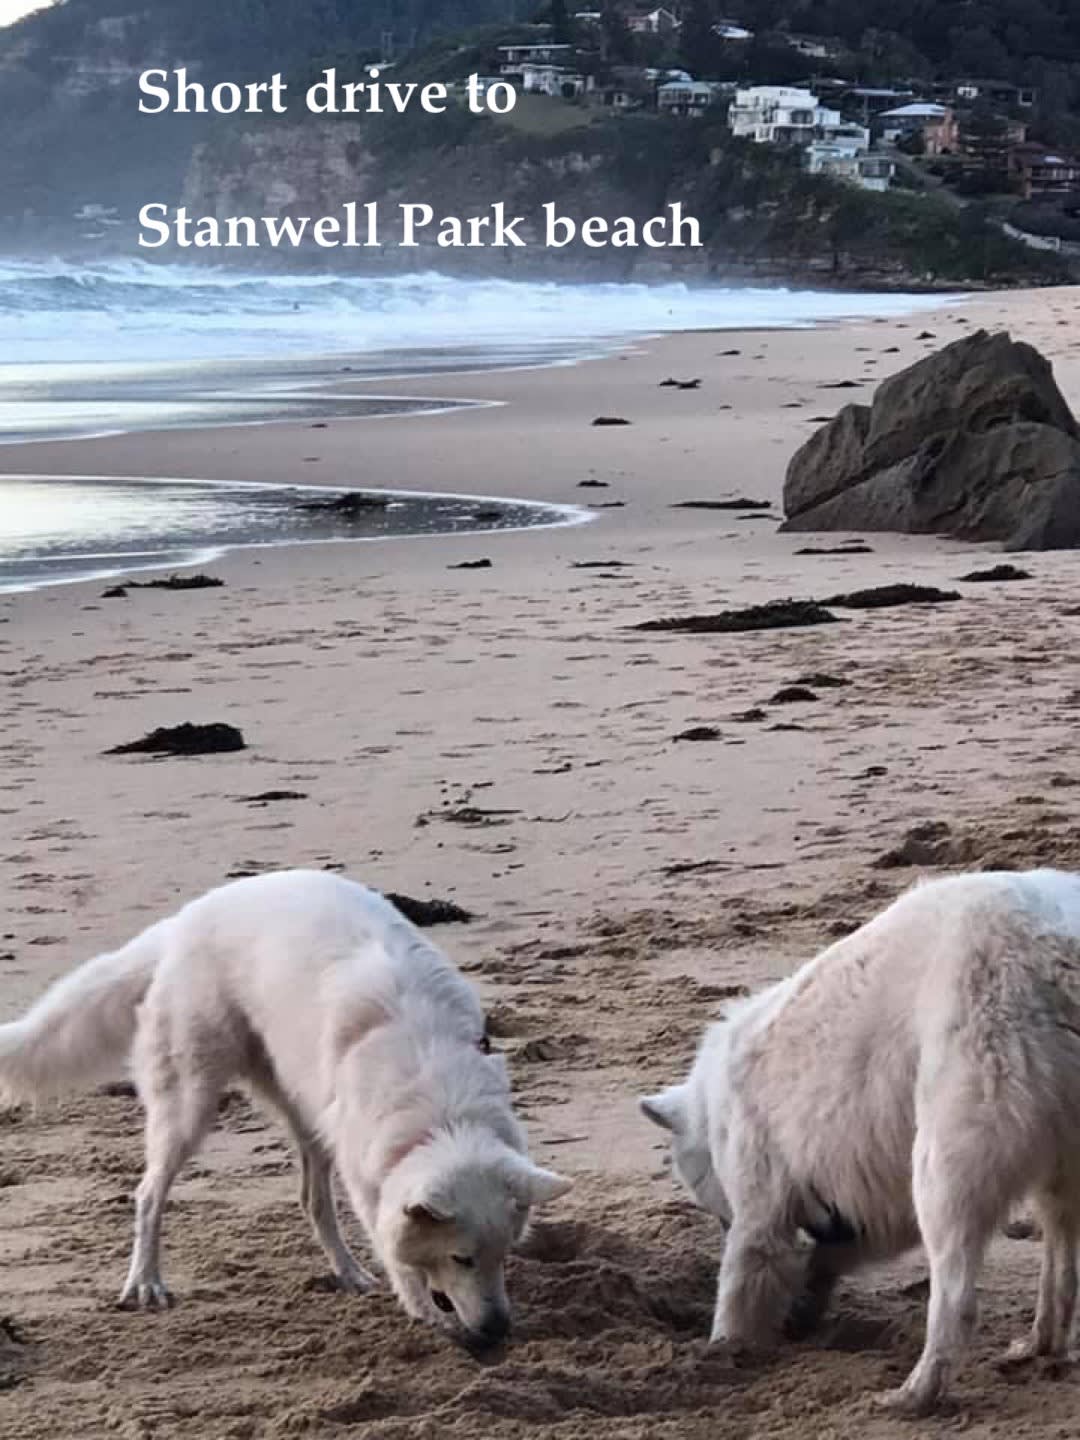 The northern most end of Stanwell Park beach is an off-leash dog area